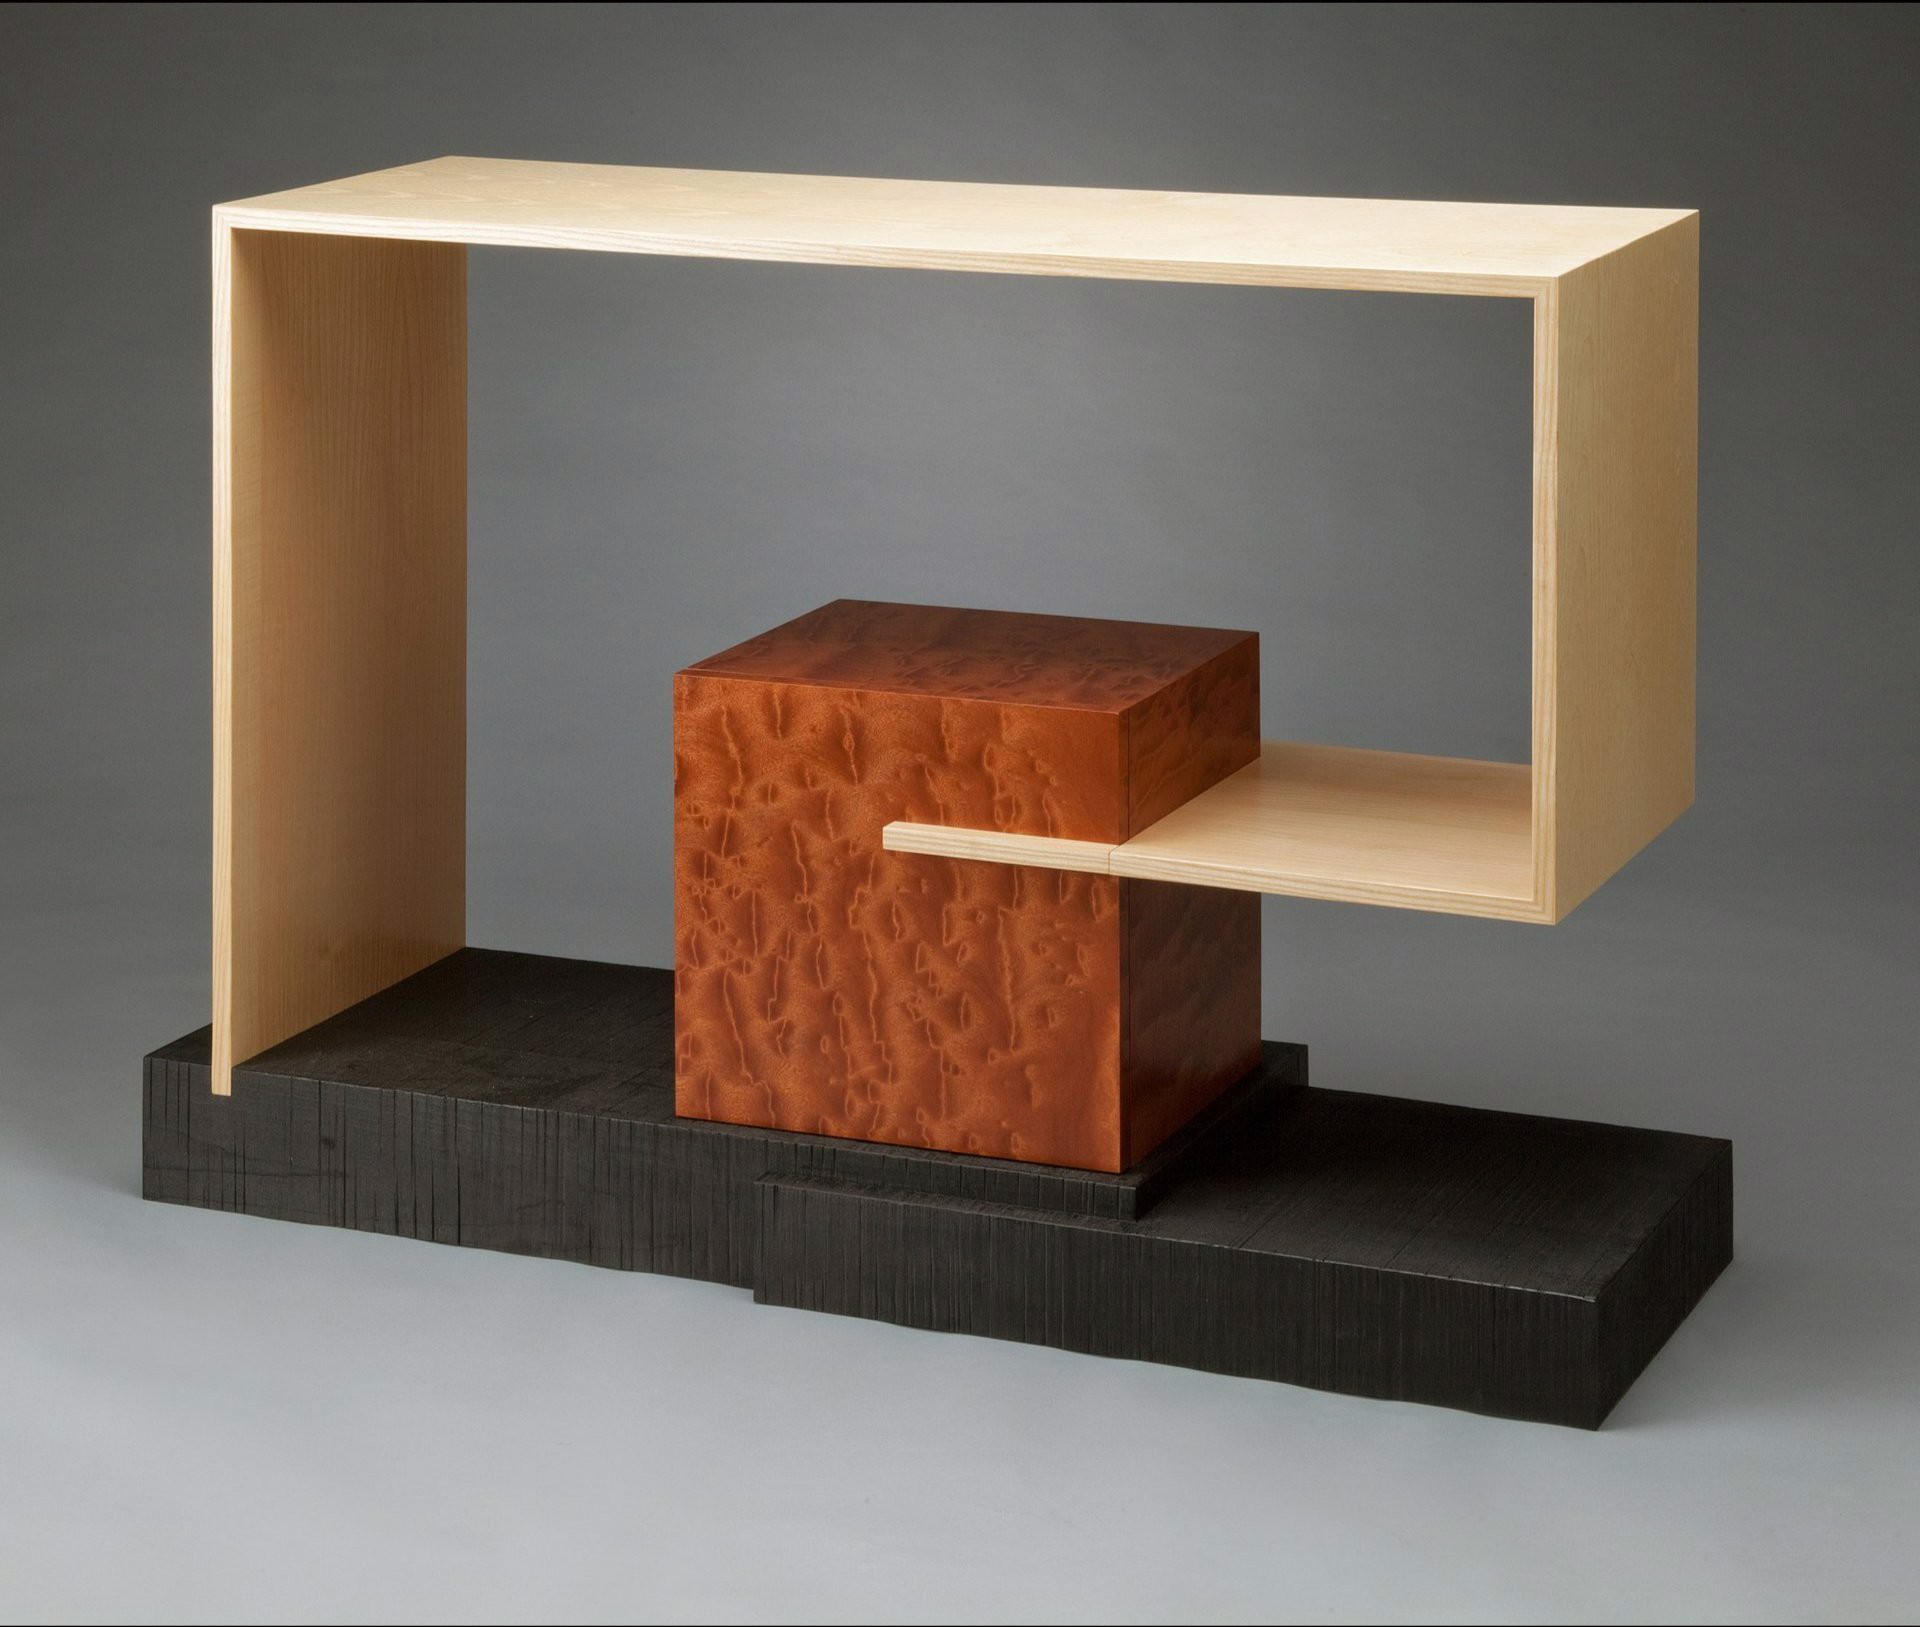 Holl Table by Tim O'Neill